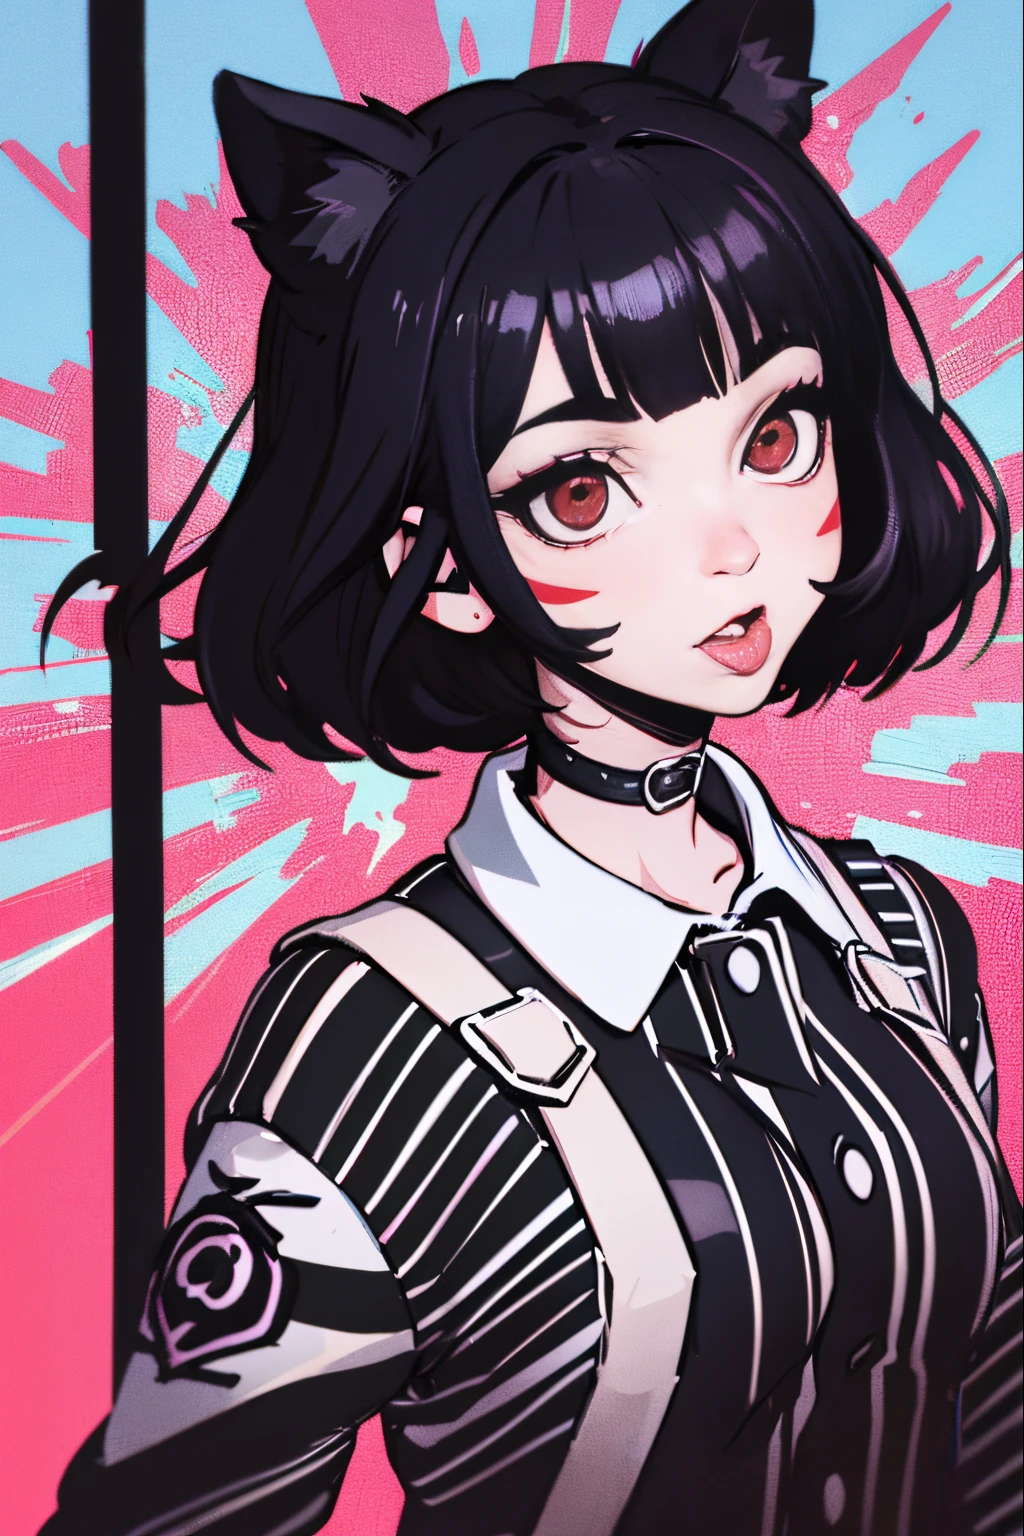 araffe girl with black and white striped shirt sticking out her tongue, she has black hair with bangs, goth girl aesthetic, y 2 k cutecore clowncore, very very low quality picture, 1 7 - year - old goth girl, “uwu the prismatic person, she has a cute expressive face, ((red)) baggy eyes